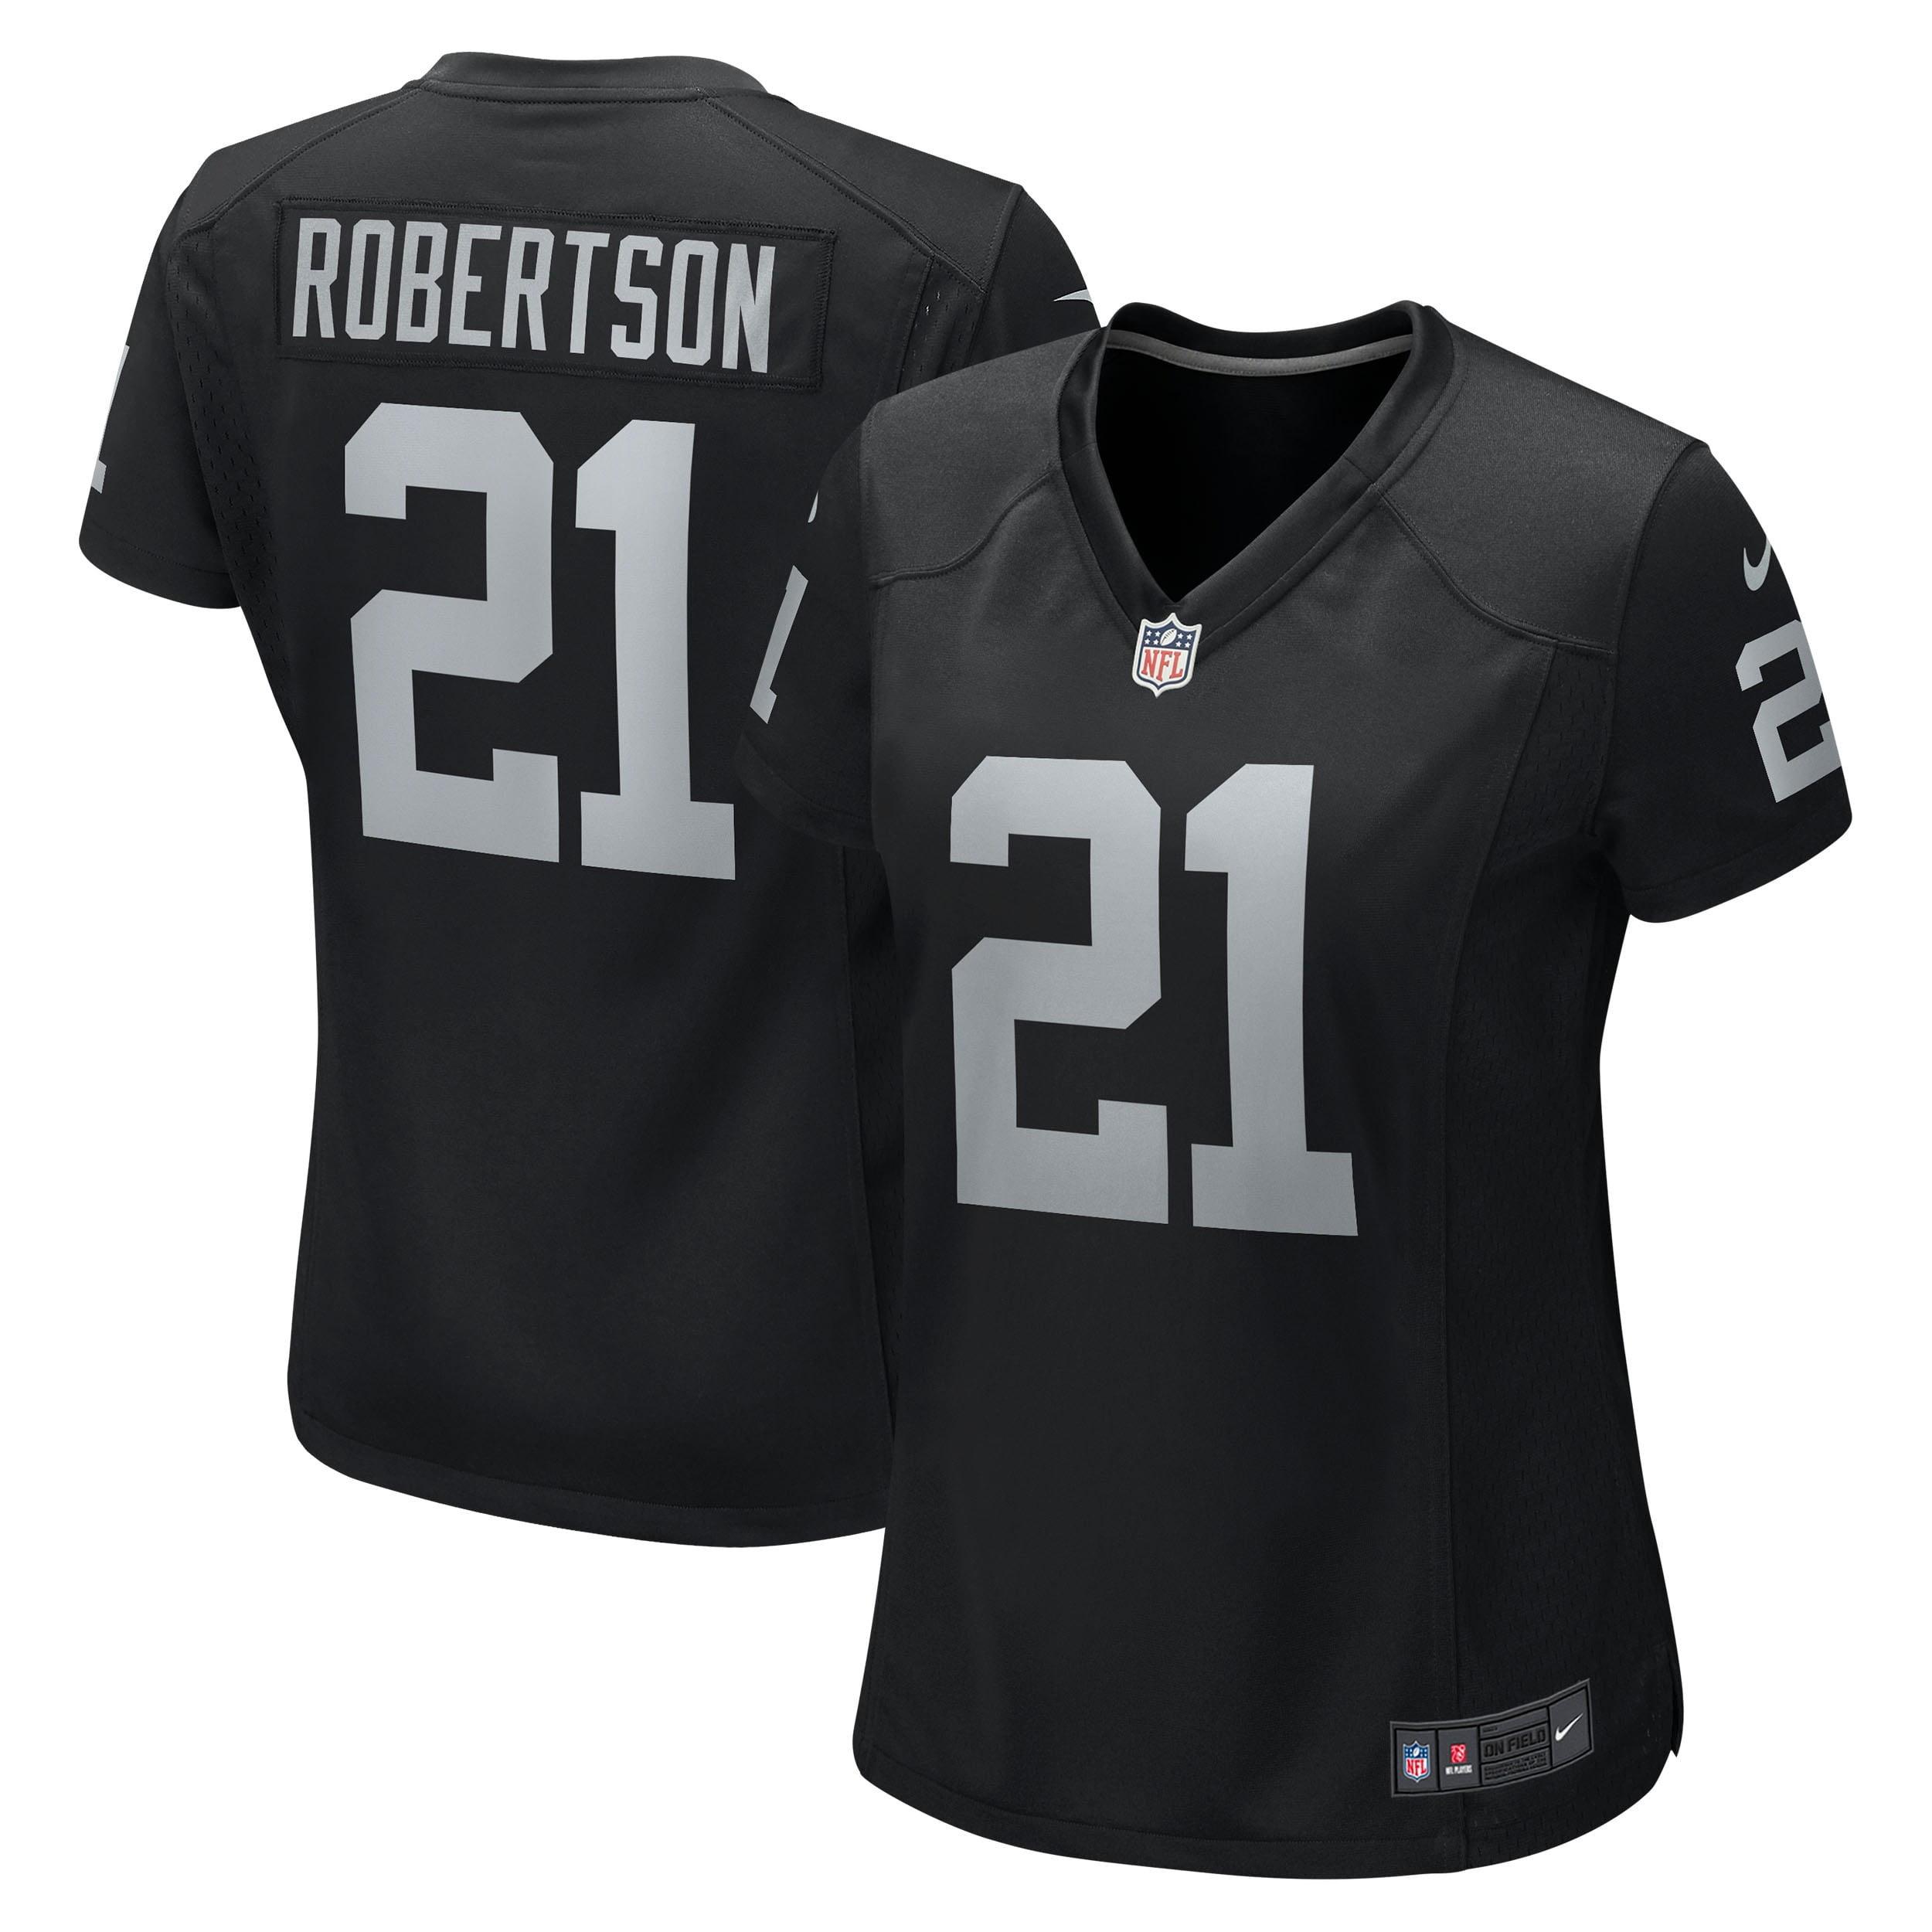 robertson jersey number